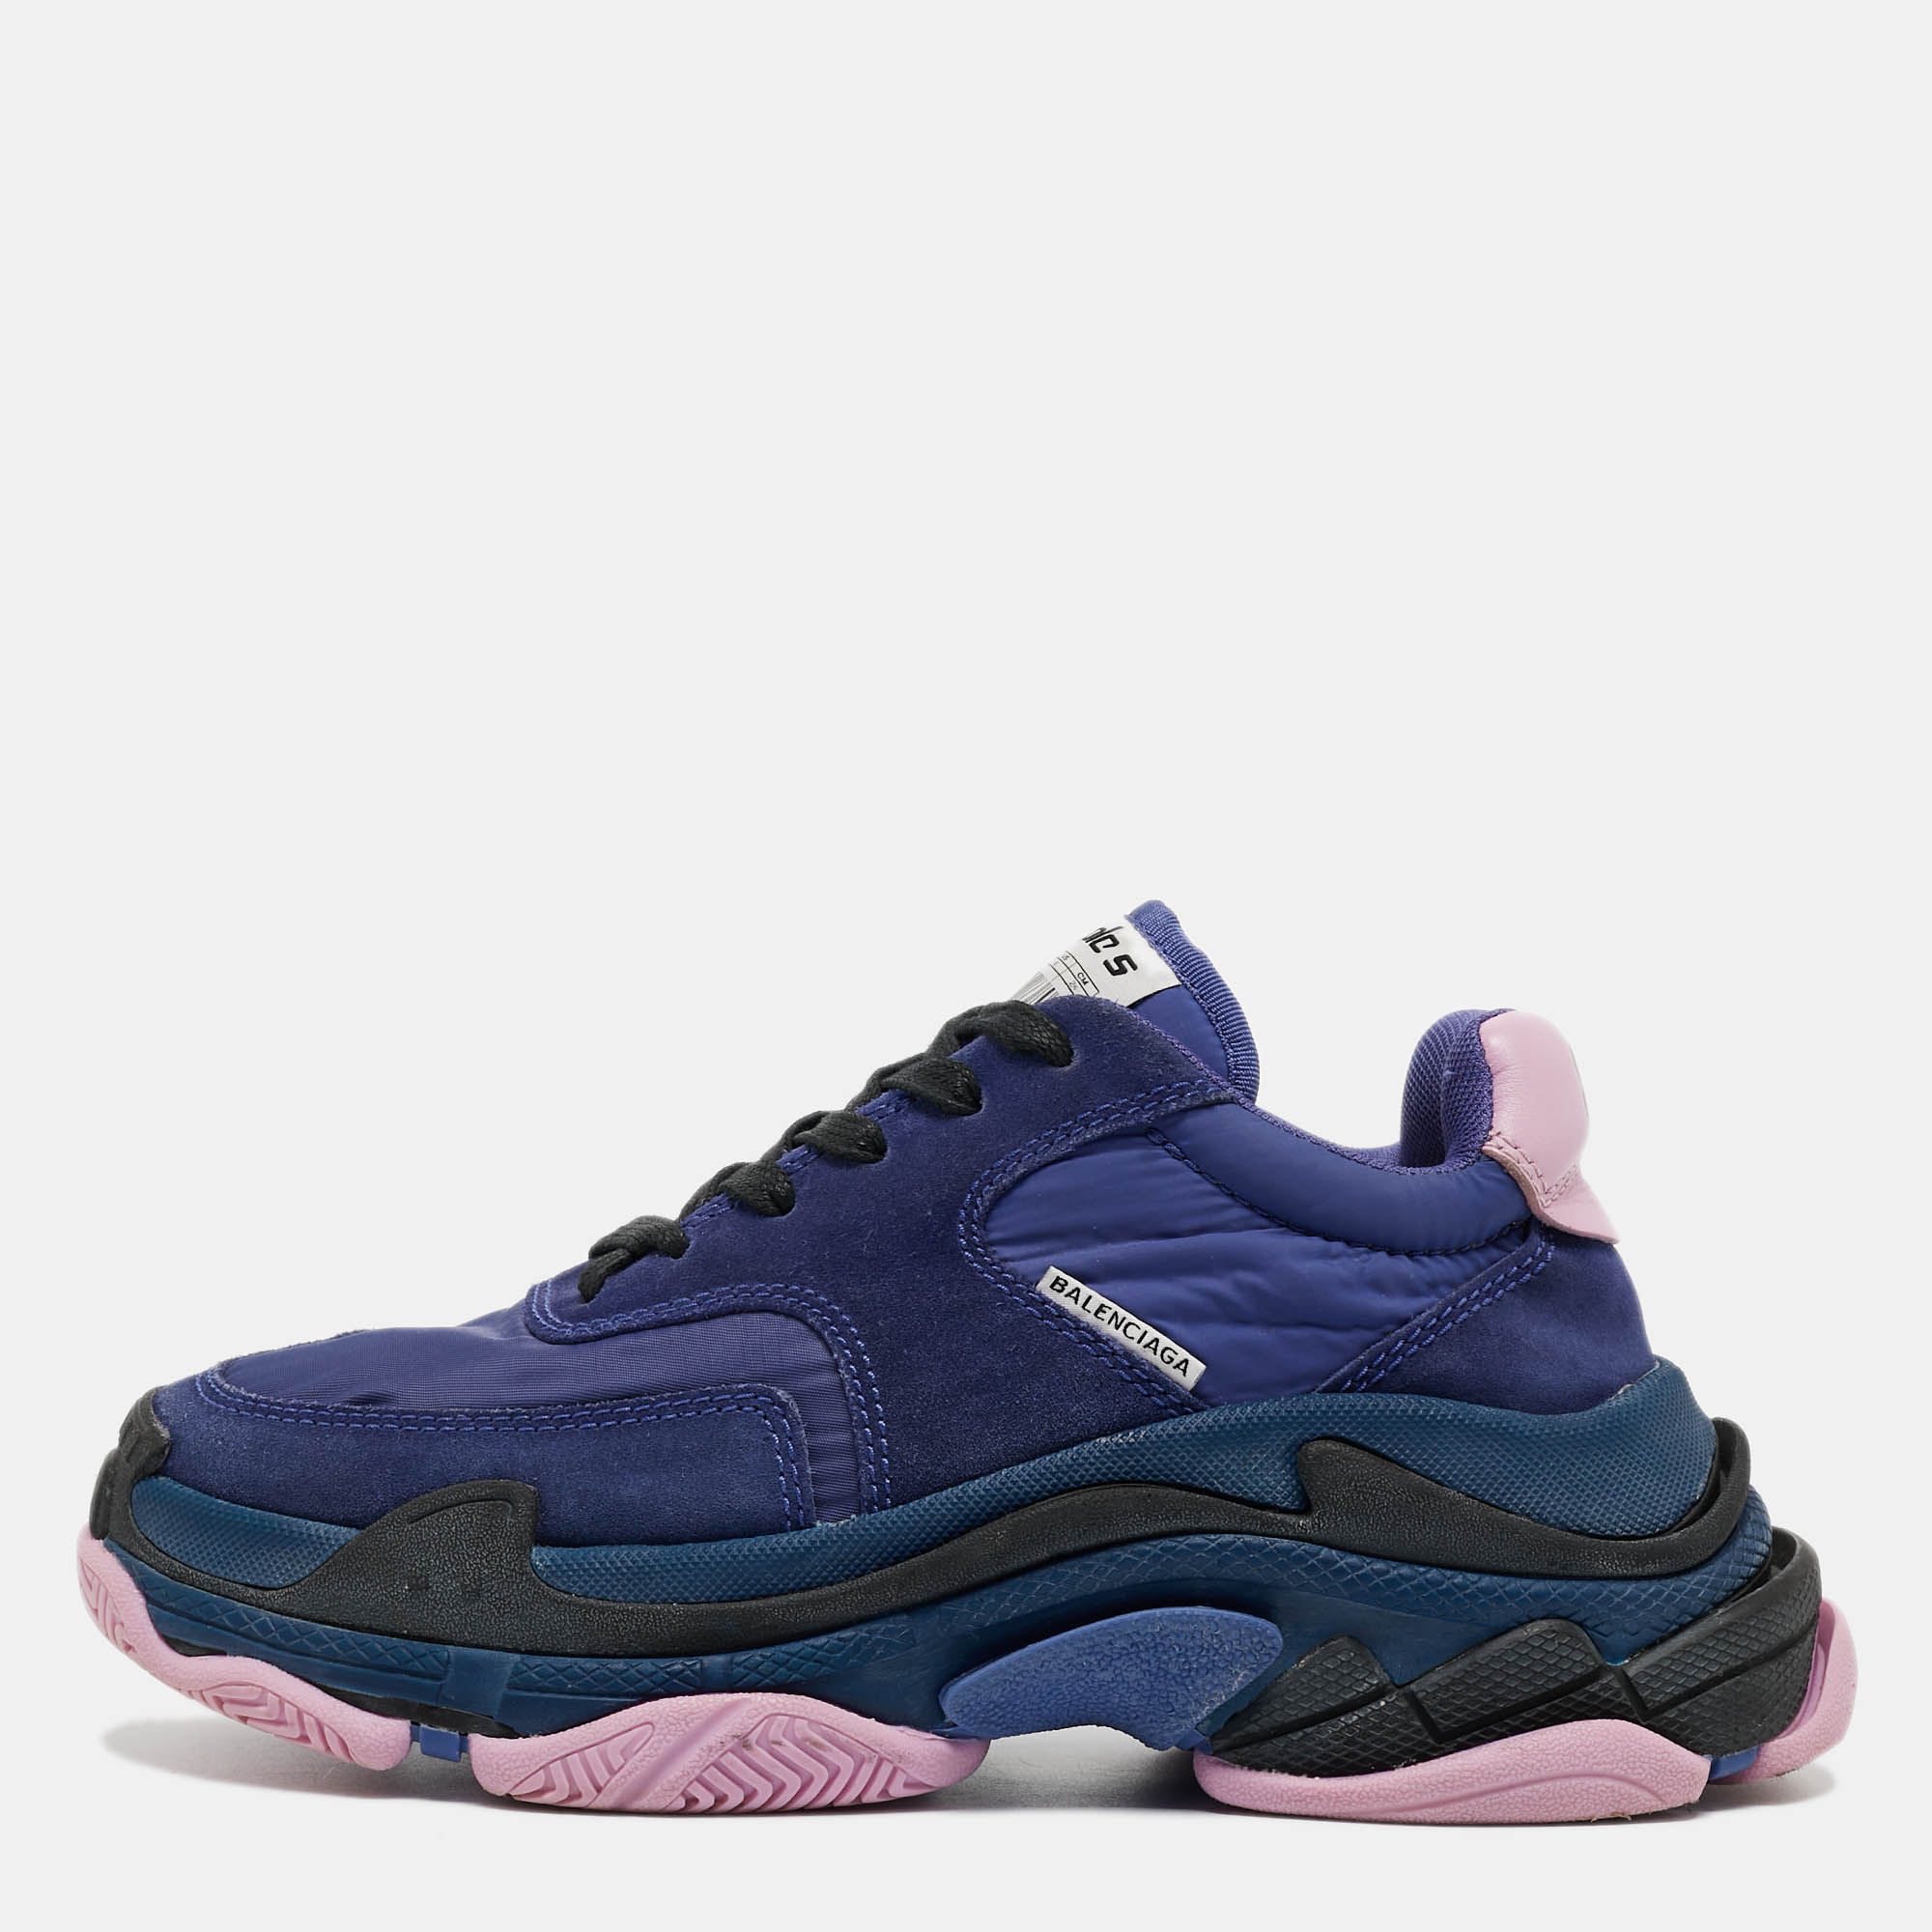 Balenciaga Navy Blue/Pink Suede And Nylon Triple S Sneakers Size 36